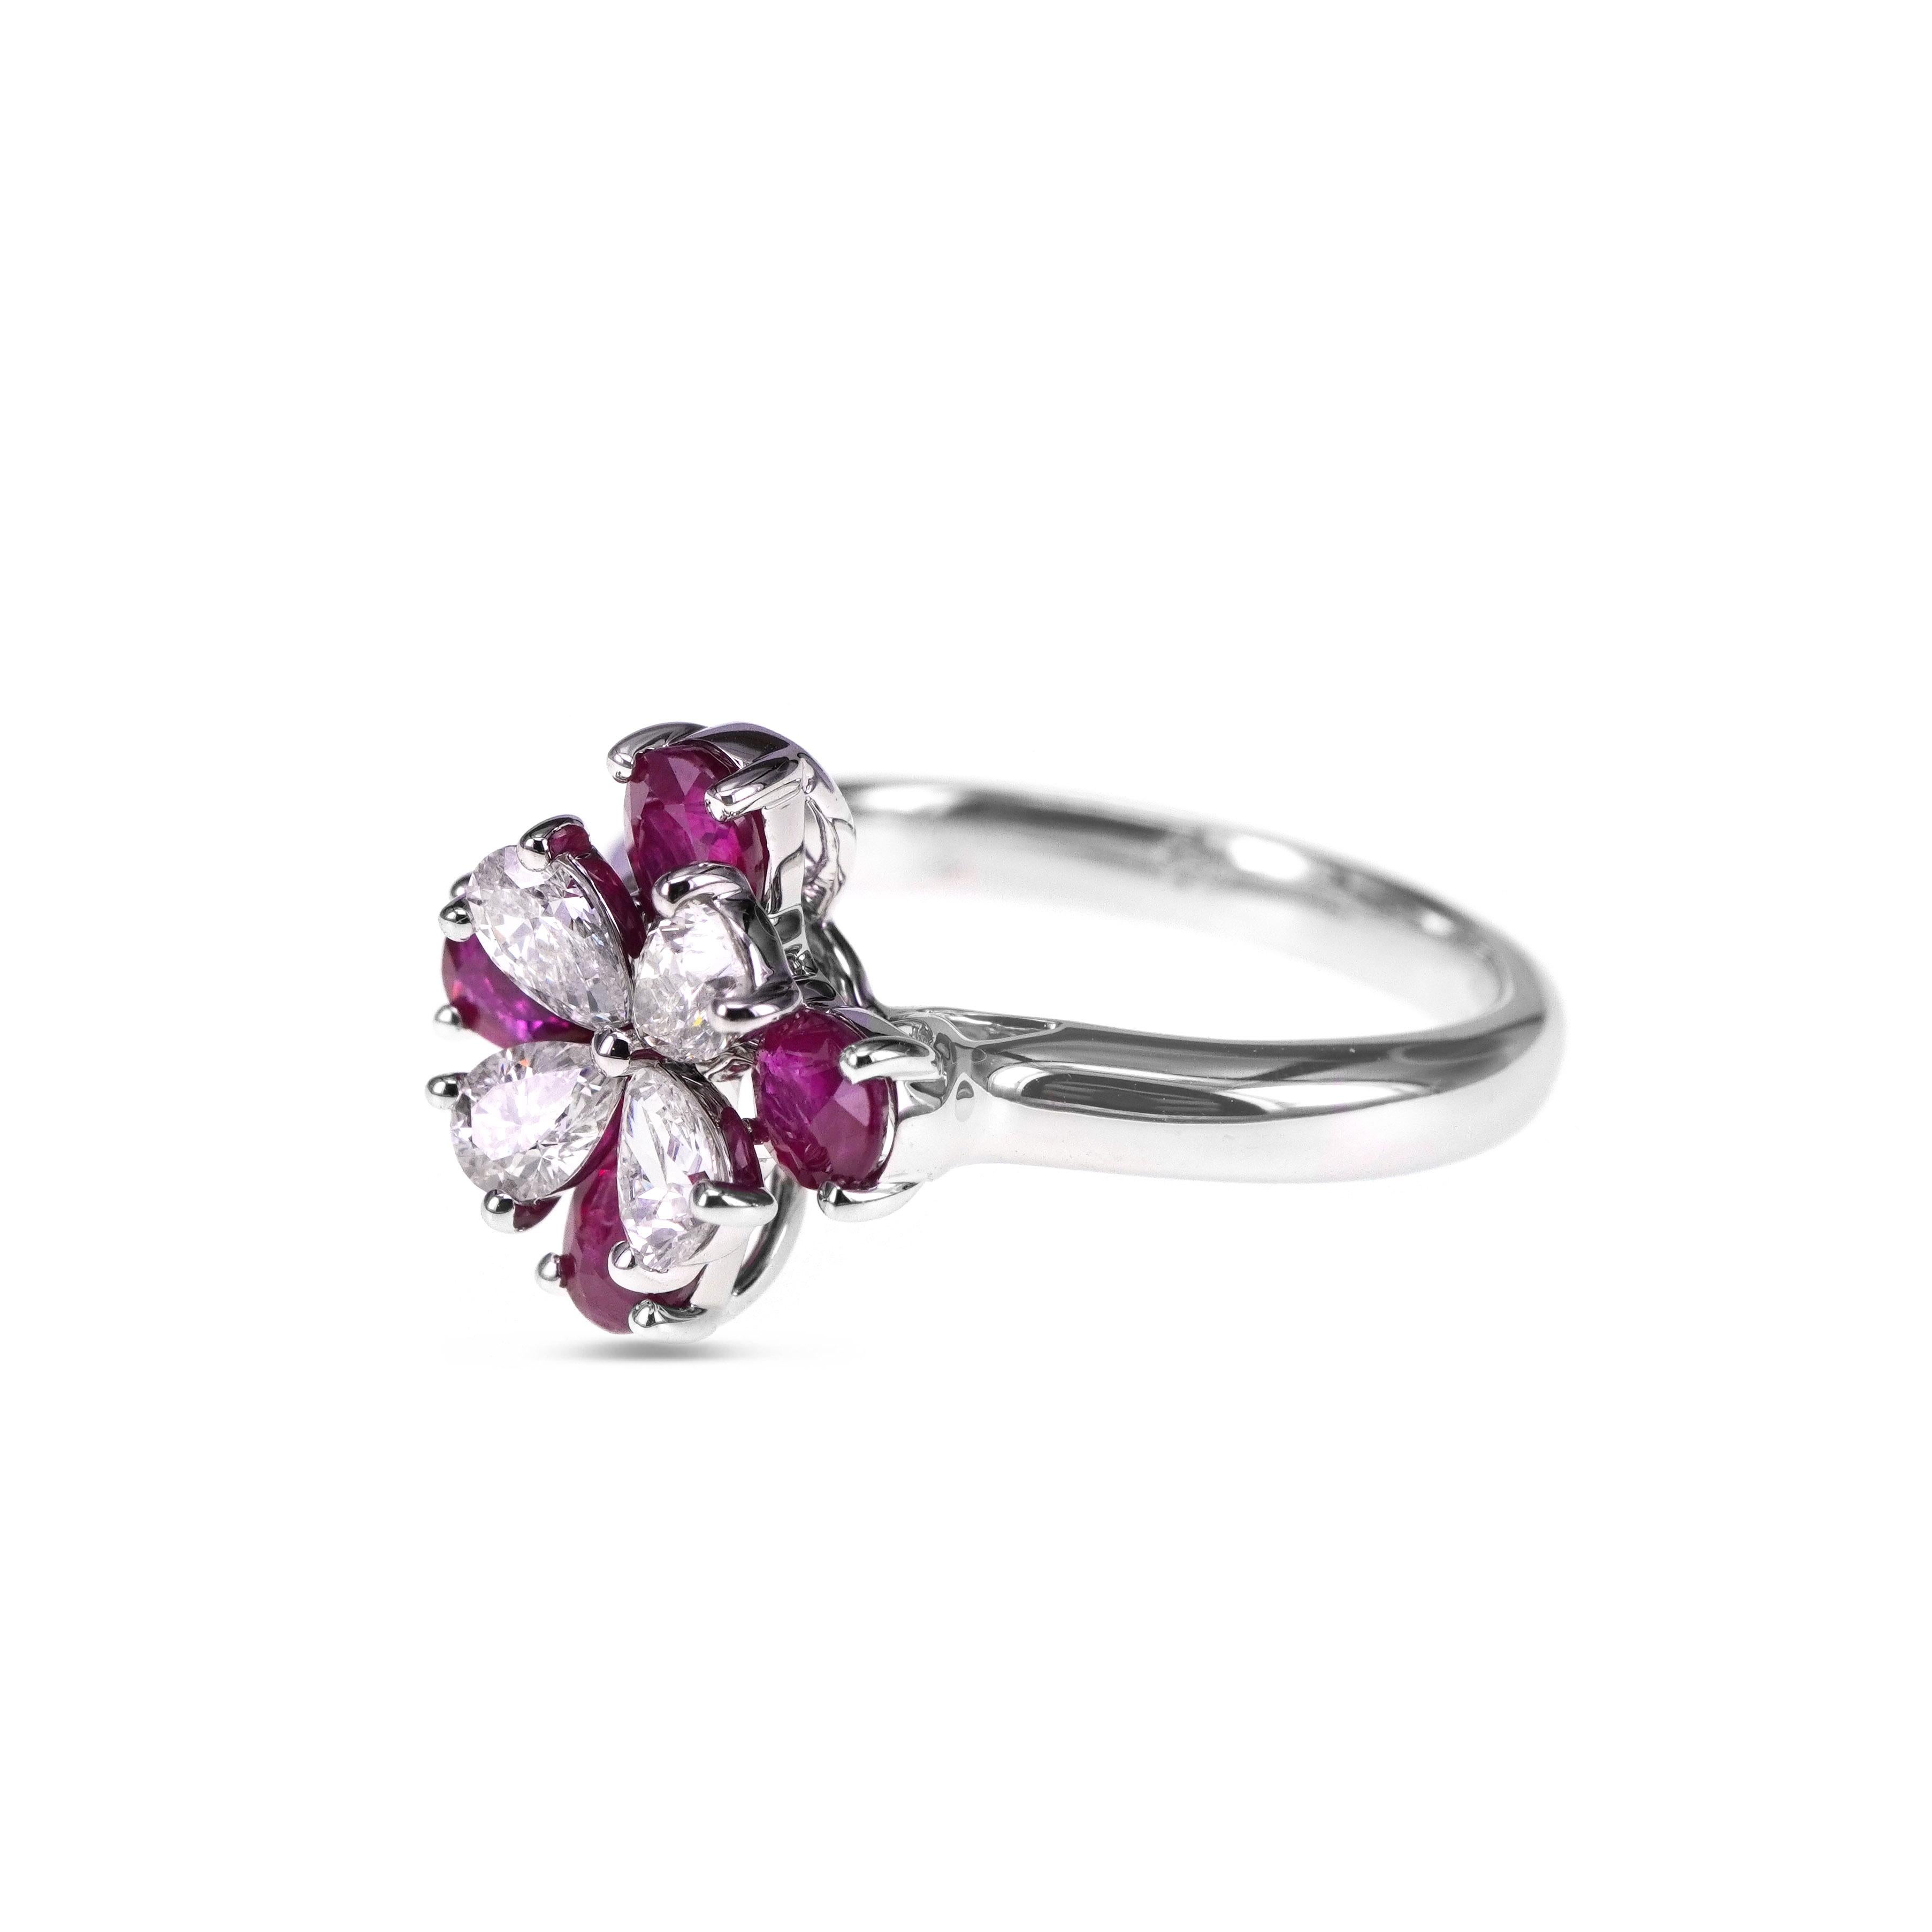 A classical combination of 1.02 carats of vivid red ruby and 0.52 carat of pear shape brilliant white diamond sits prettily on the finger. 
The details of the ring are mentioned below:
Color: F
Clarity: Vs
Ring Size: US 6.5
Ring size can be changed